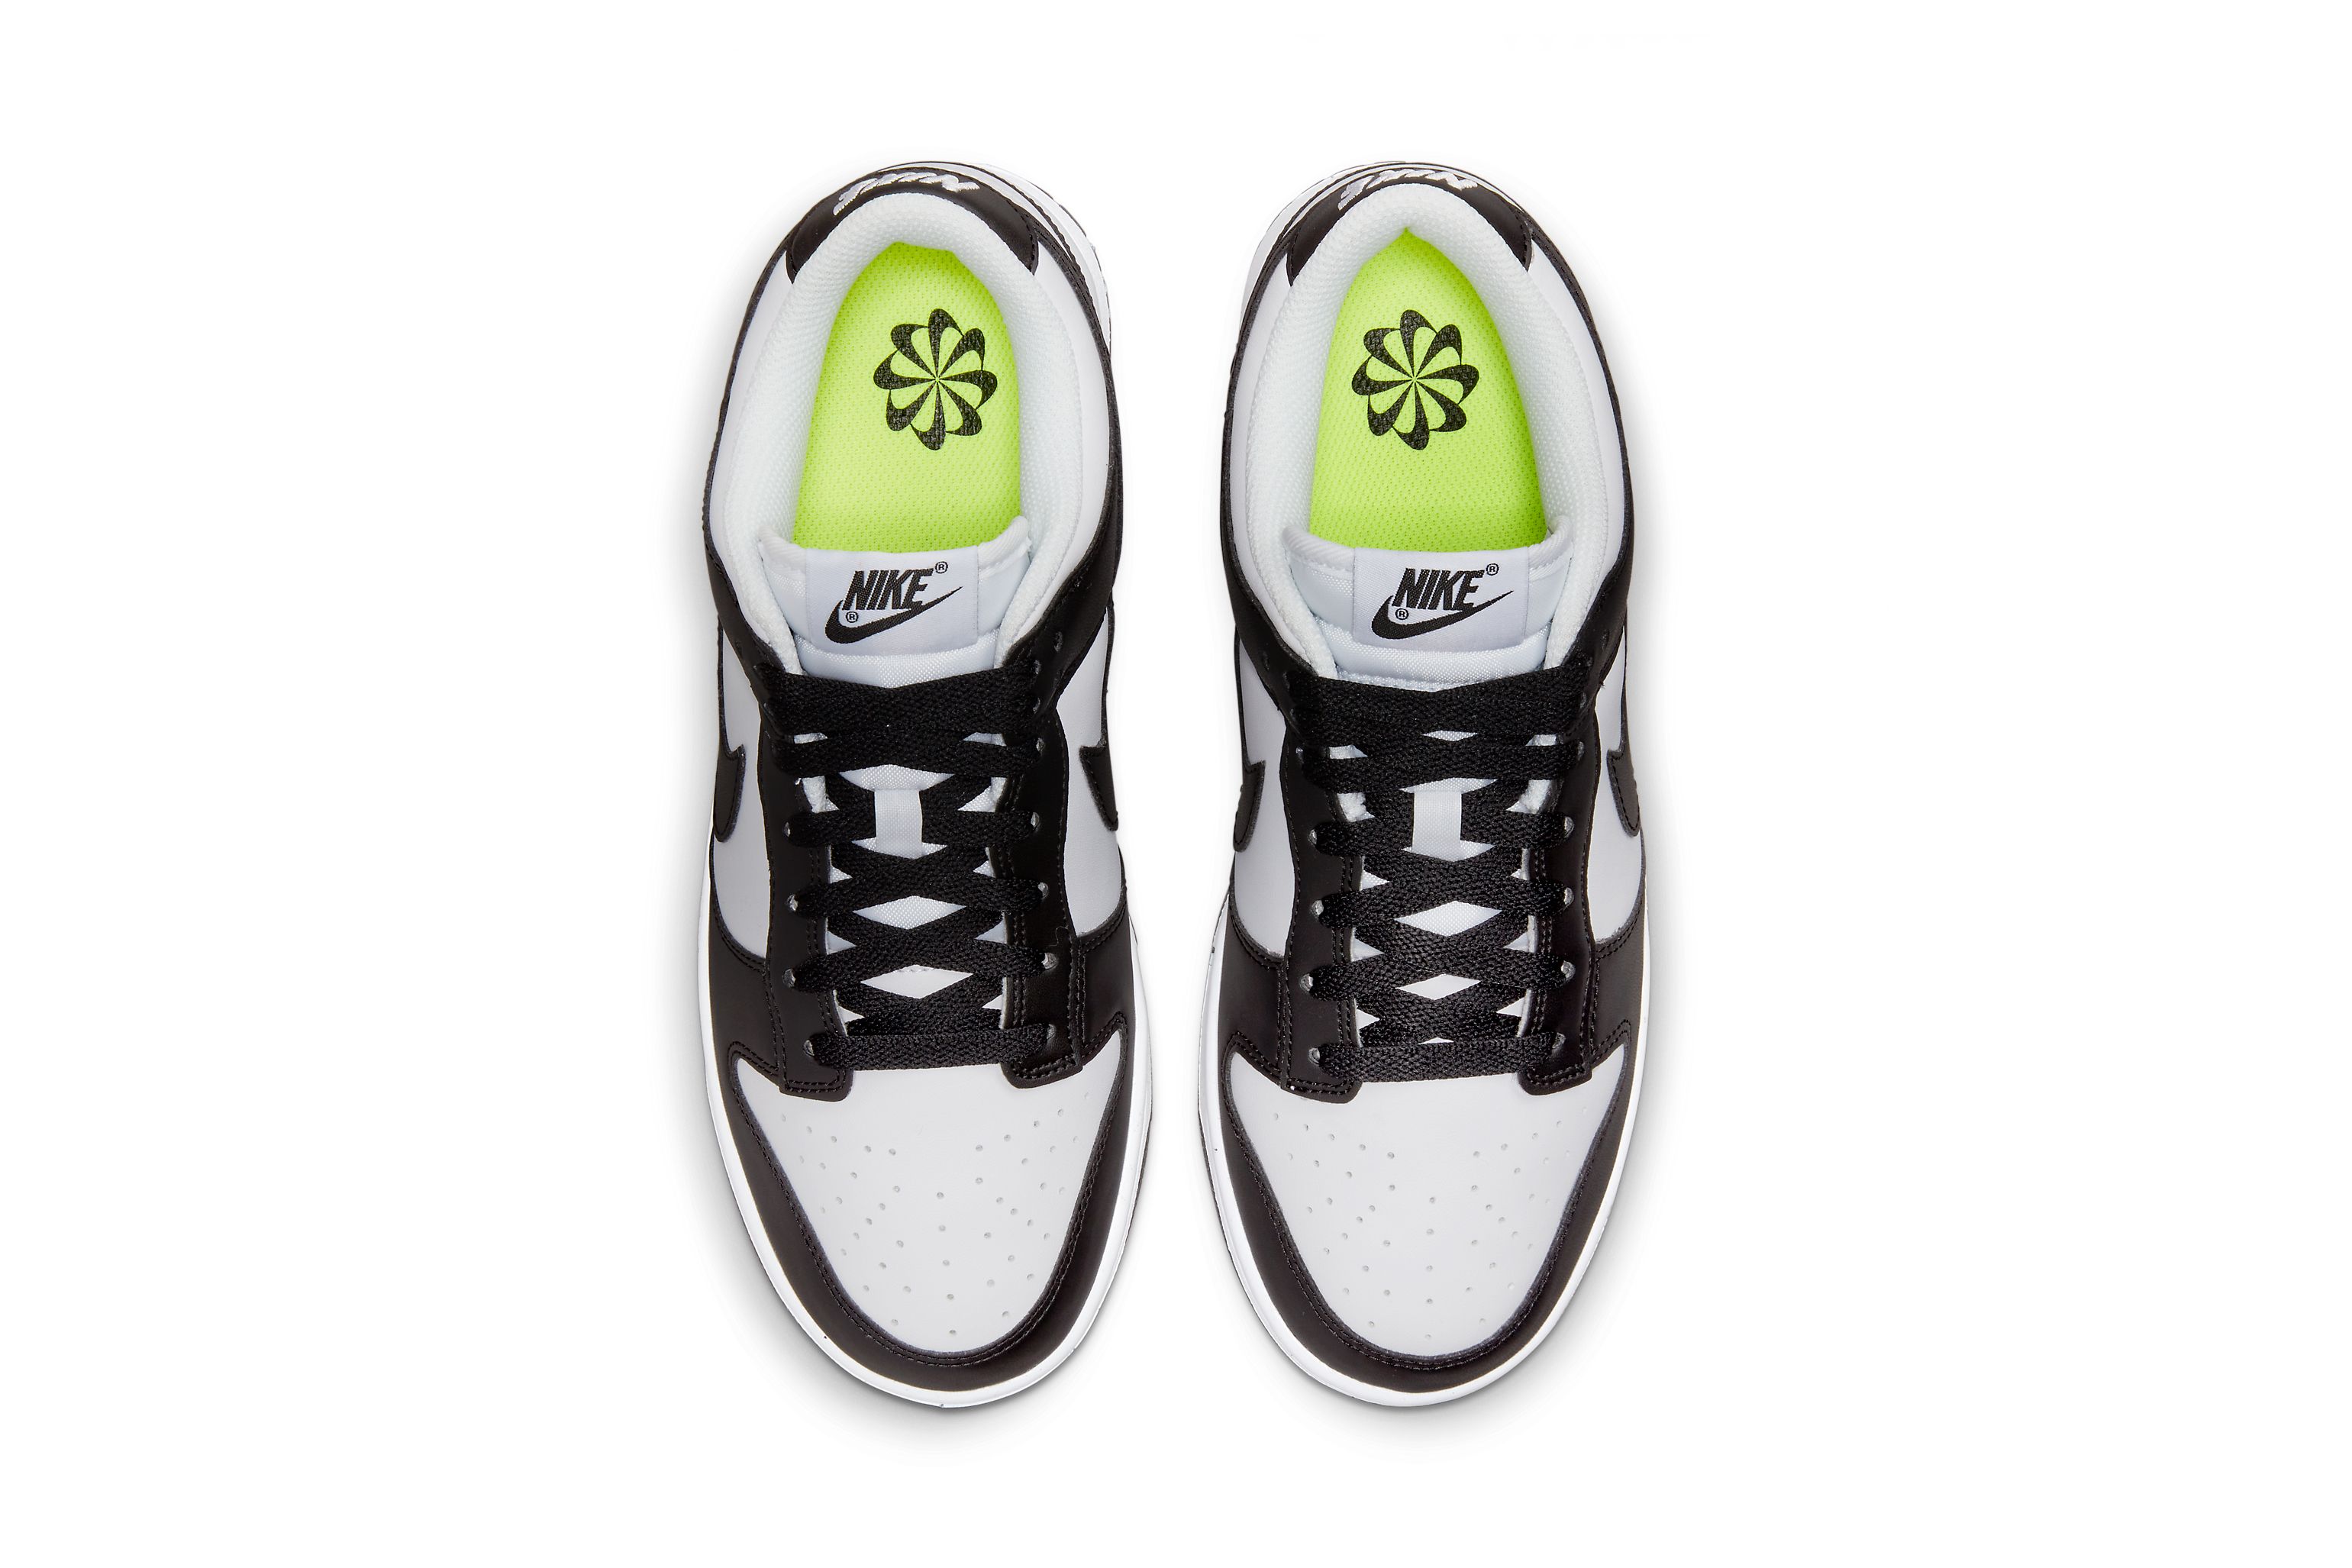 Nike Dunk Low Women's Black/White Is Back With a Sustainable